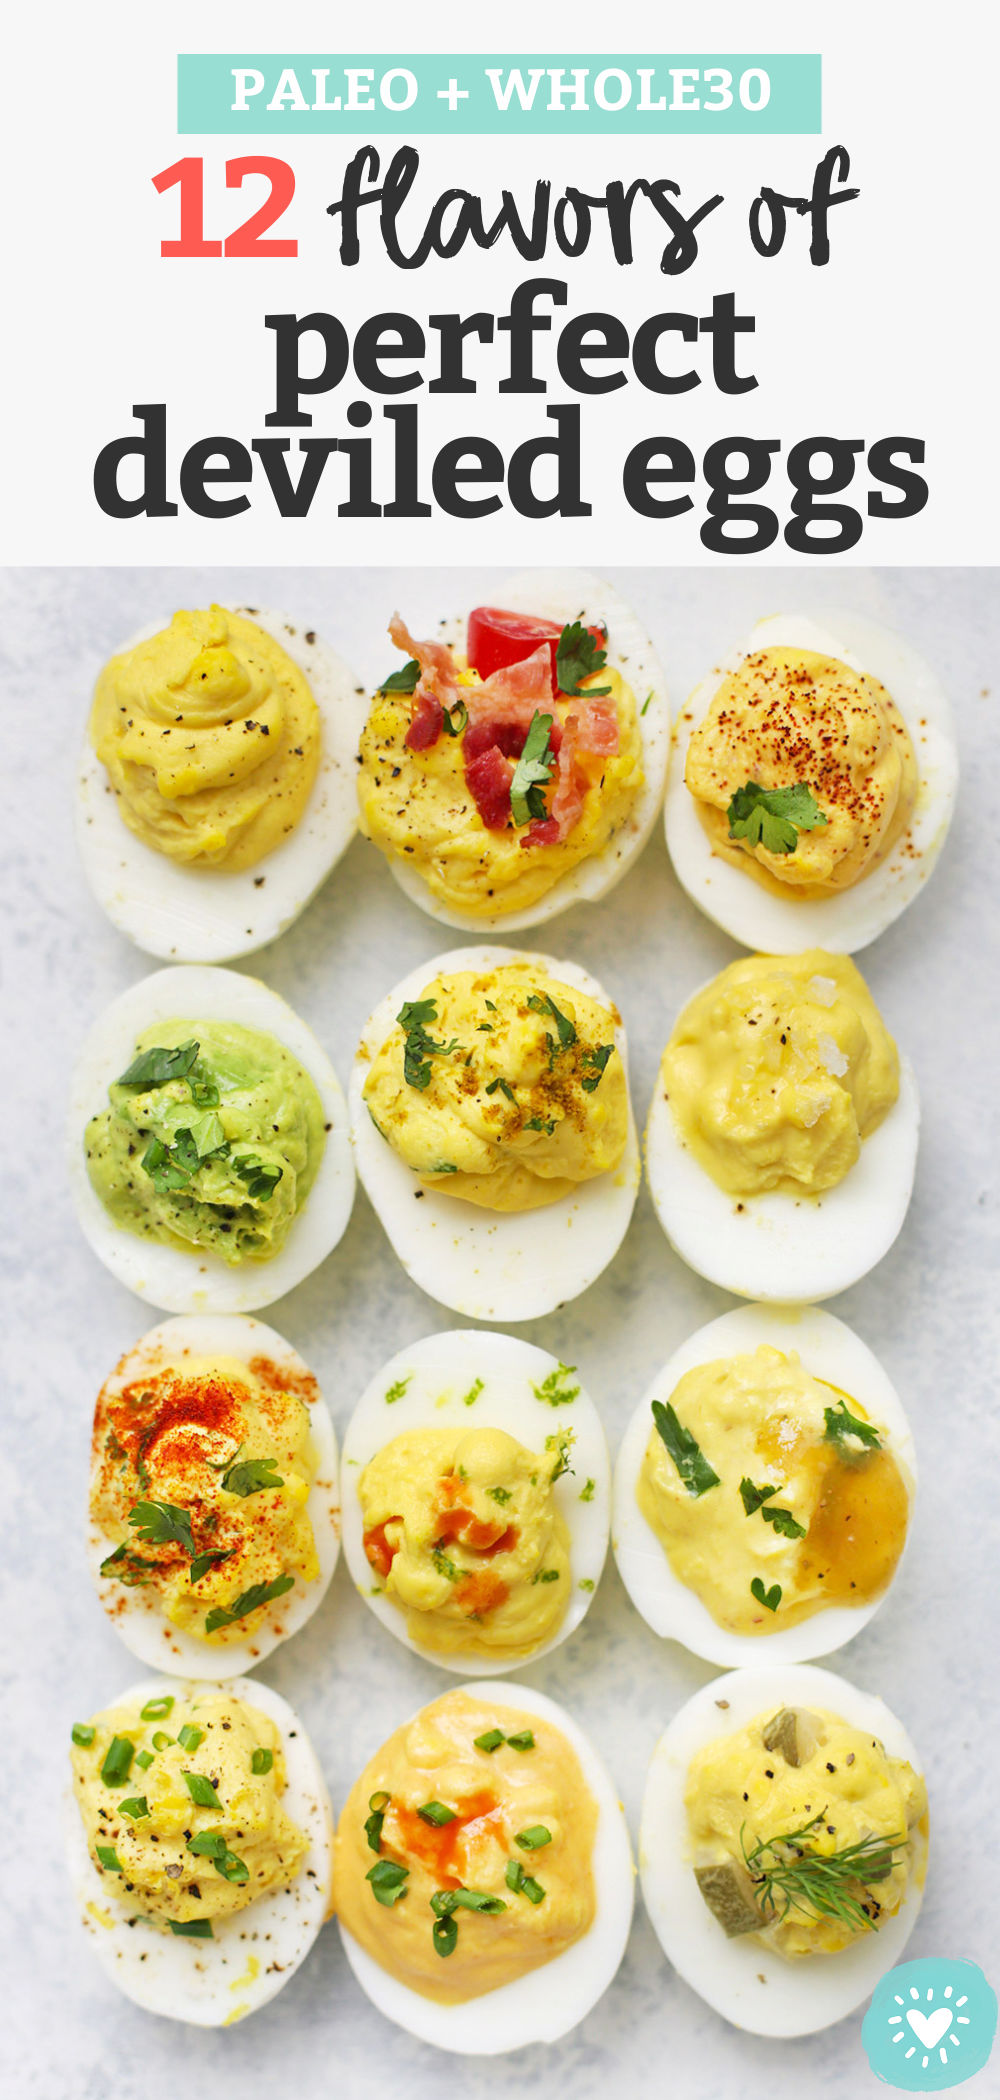 How to Make Perfect Deviled Eggs - My FAVORITE method for deviled eggs plus TWELVE delicious flavor combinations! All are paleo approved, gluten free, and absolutely delicious. // Paleo deviled eggs // the best deviled eggs recipe // deviled eggs no mayo // classic deviled eggs // perfect deviled eggs // 12 flavors of deviled eggs // #deviledeggs #hardboiledeggs #eggs #appetizers #paleo #glutenfree #potluck #picnic #barbecue